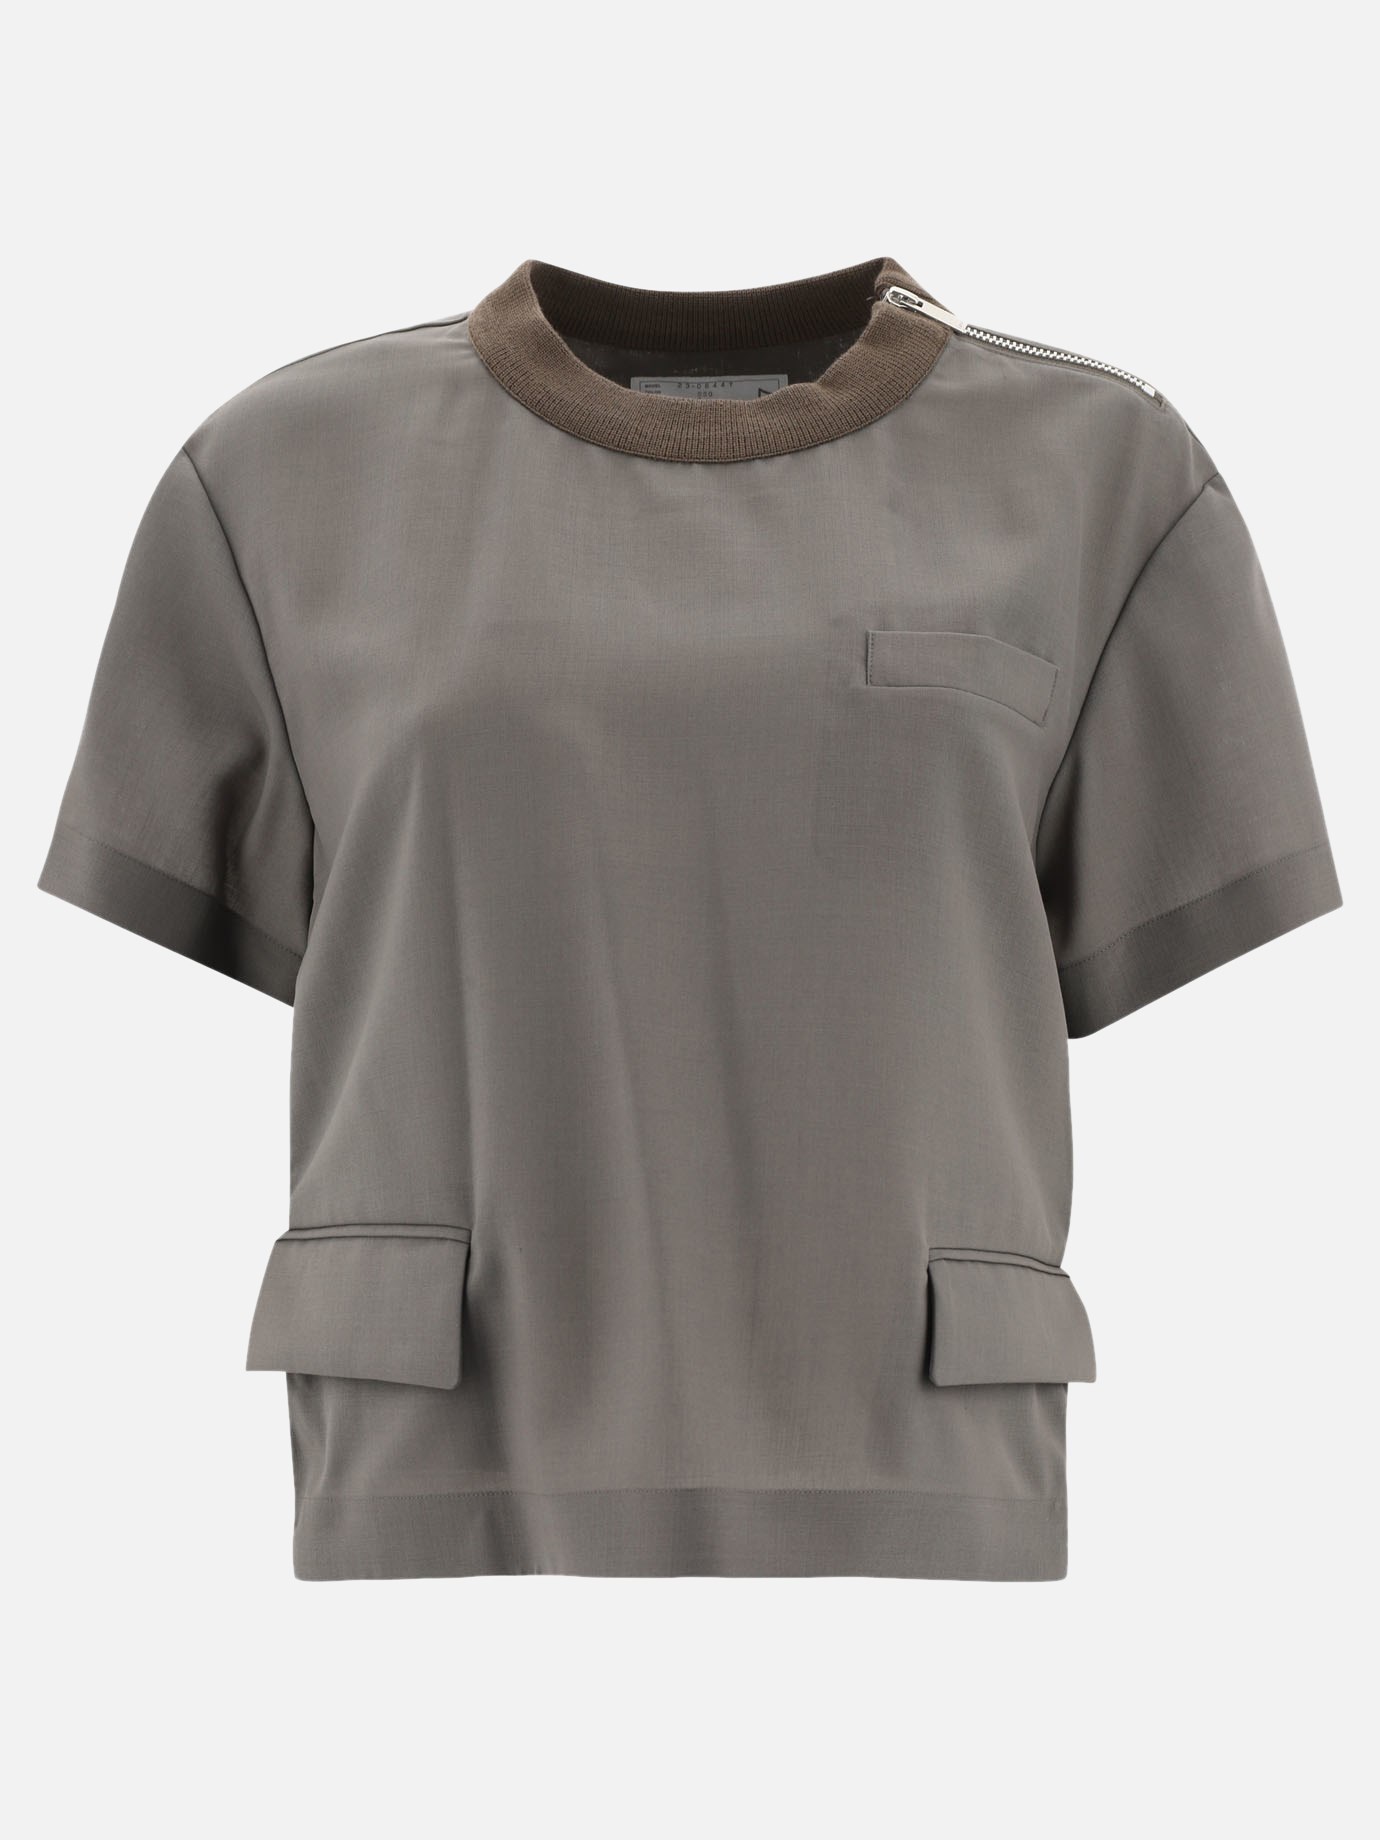 T.shirt with flap pockets